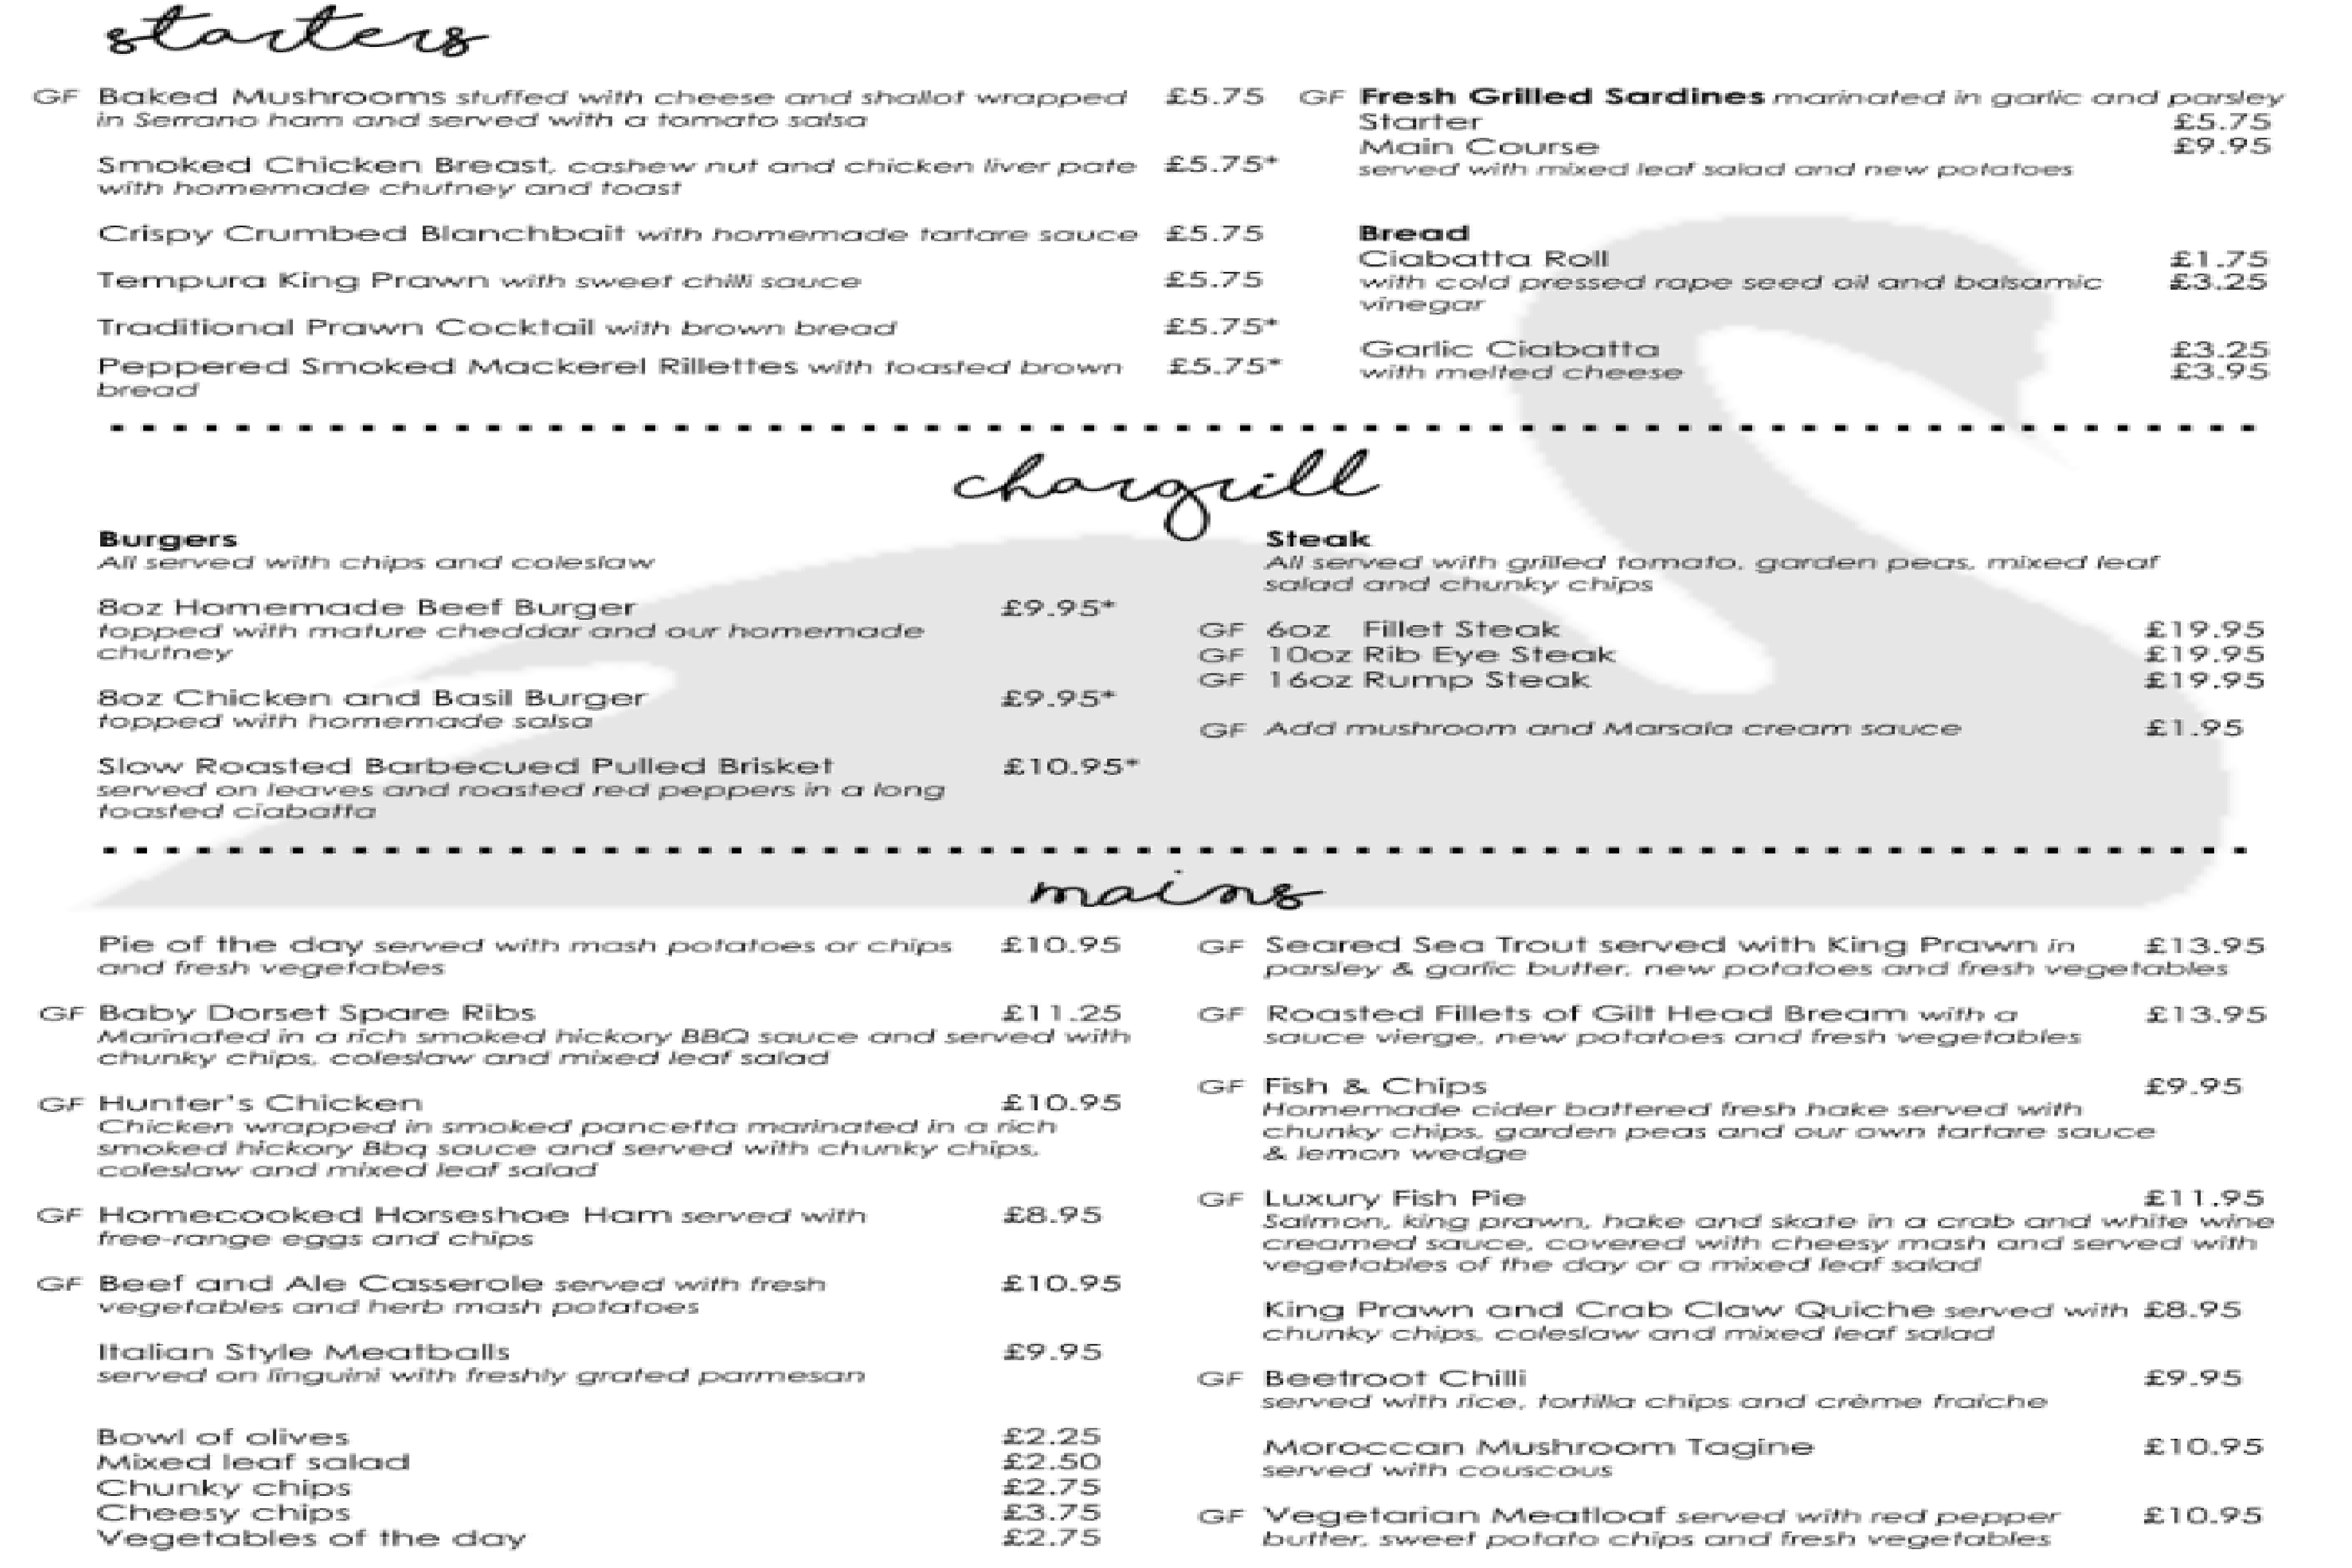 New Menu has arrived, head over to menu page to view it.